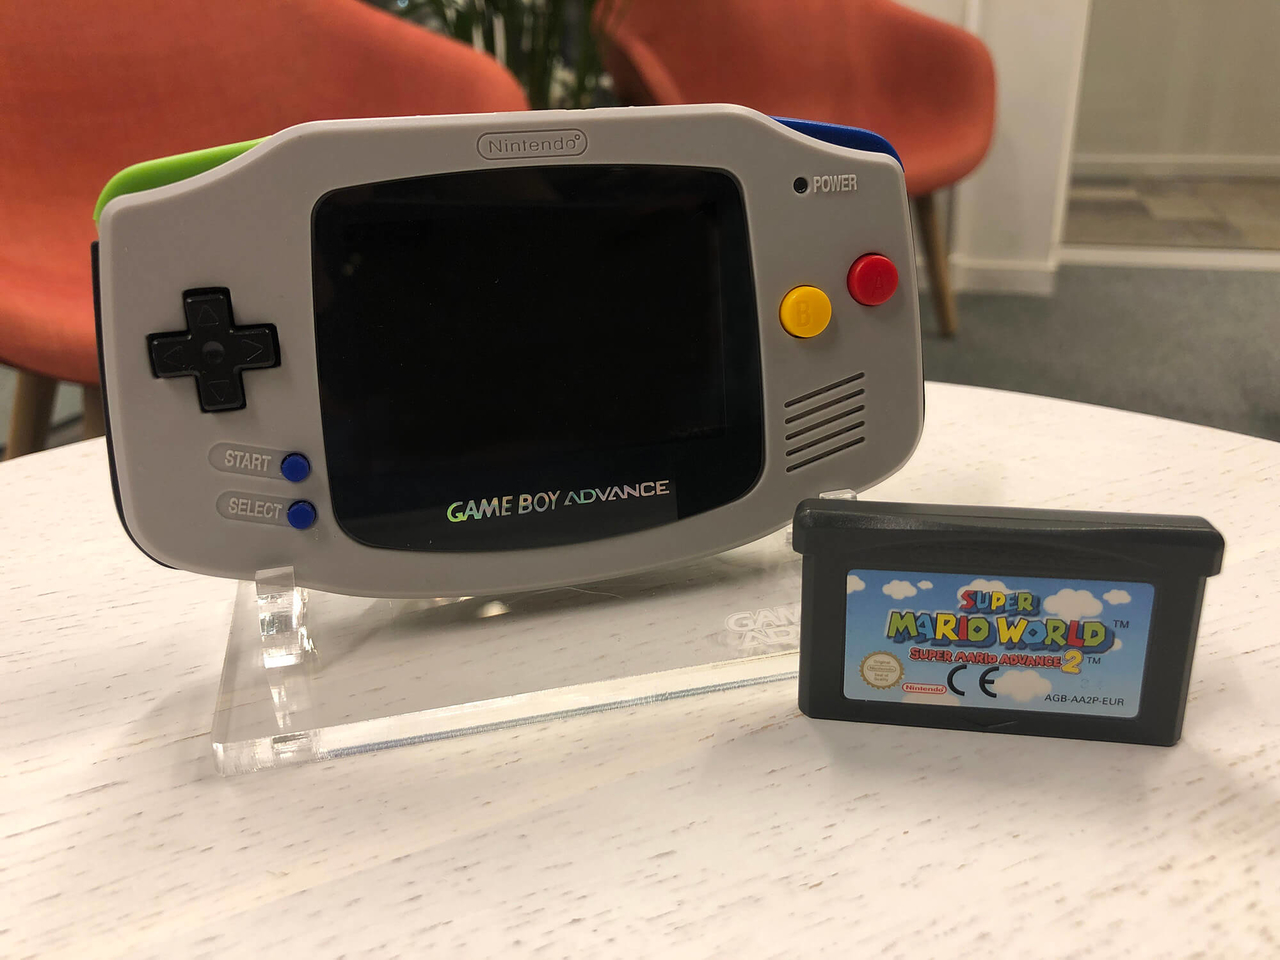 Gameboy Advance Limited SNES Edition + AGS 101 Backlight + Super Mario World - Gameboy Advance Hardware - 2